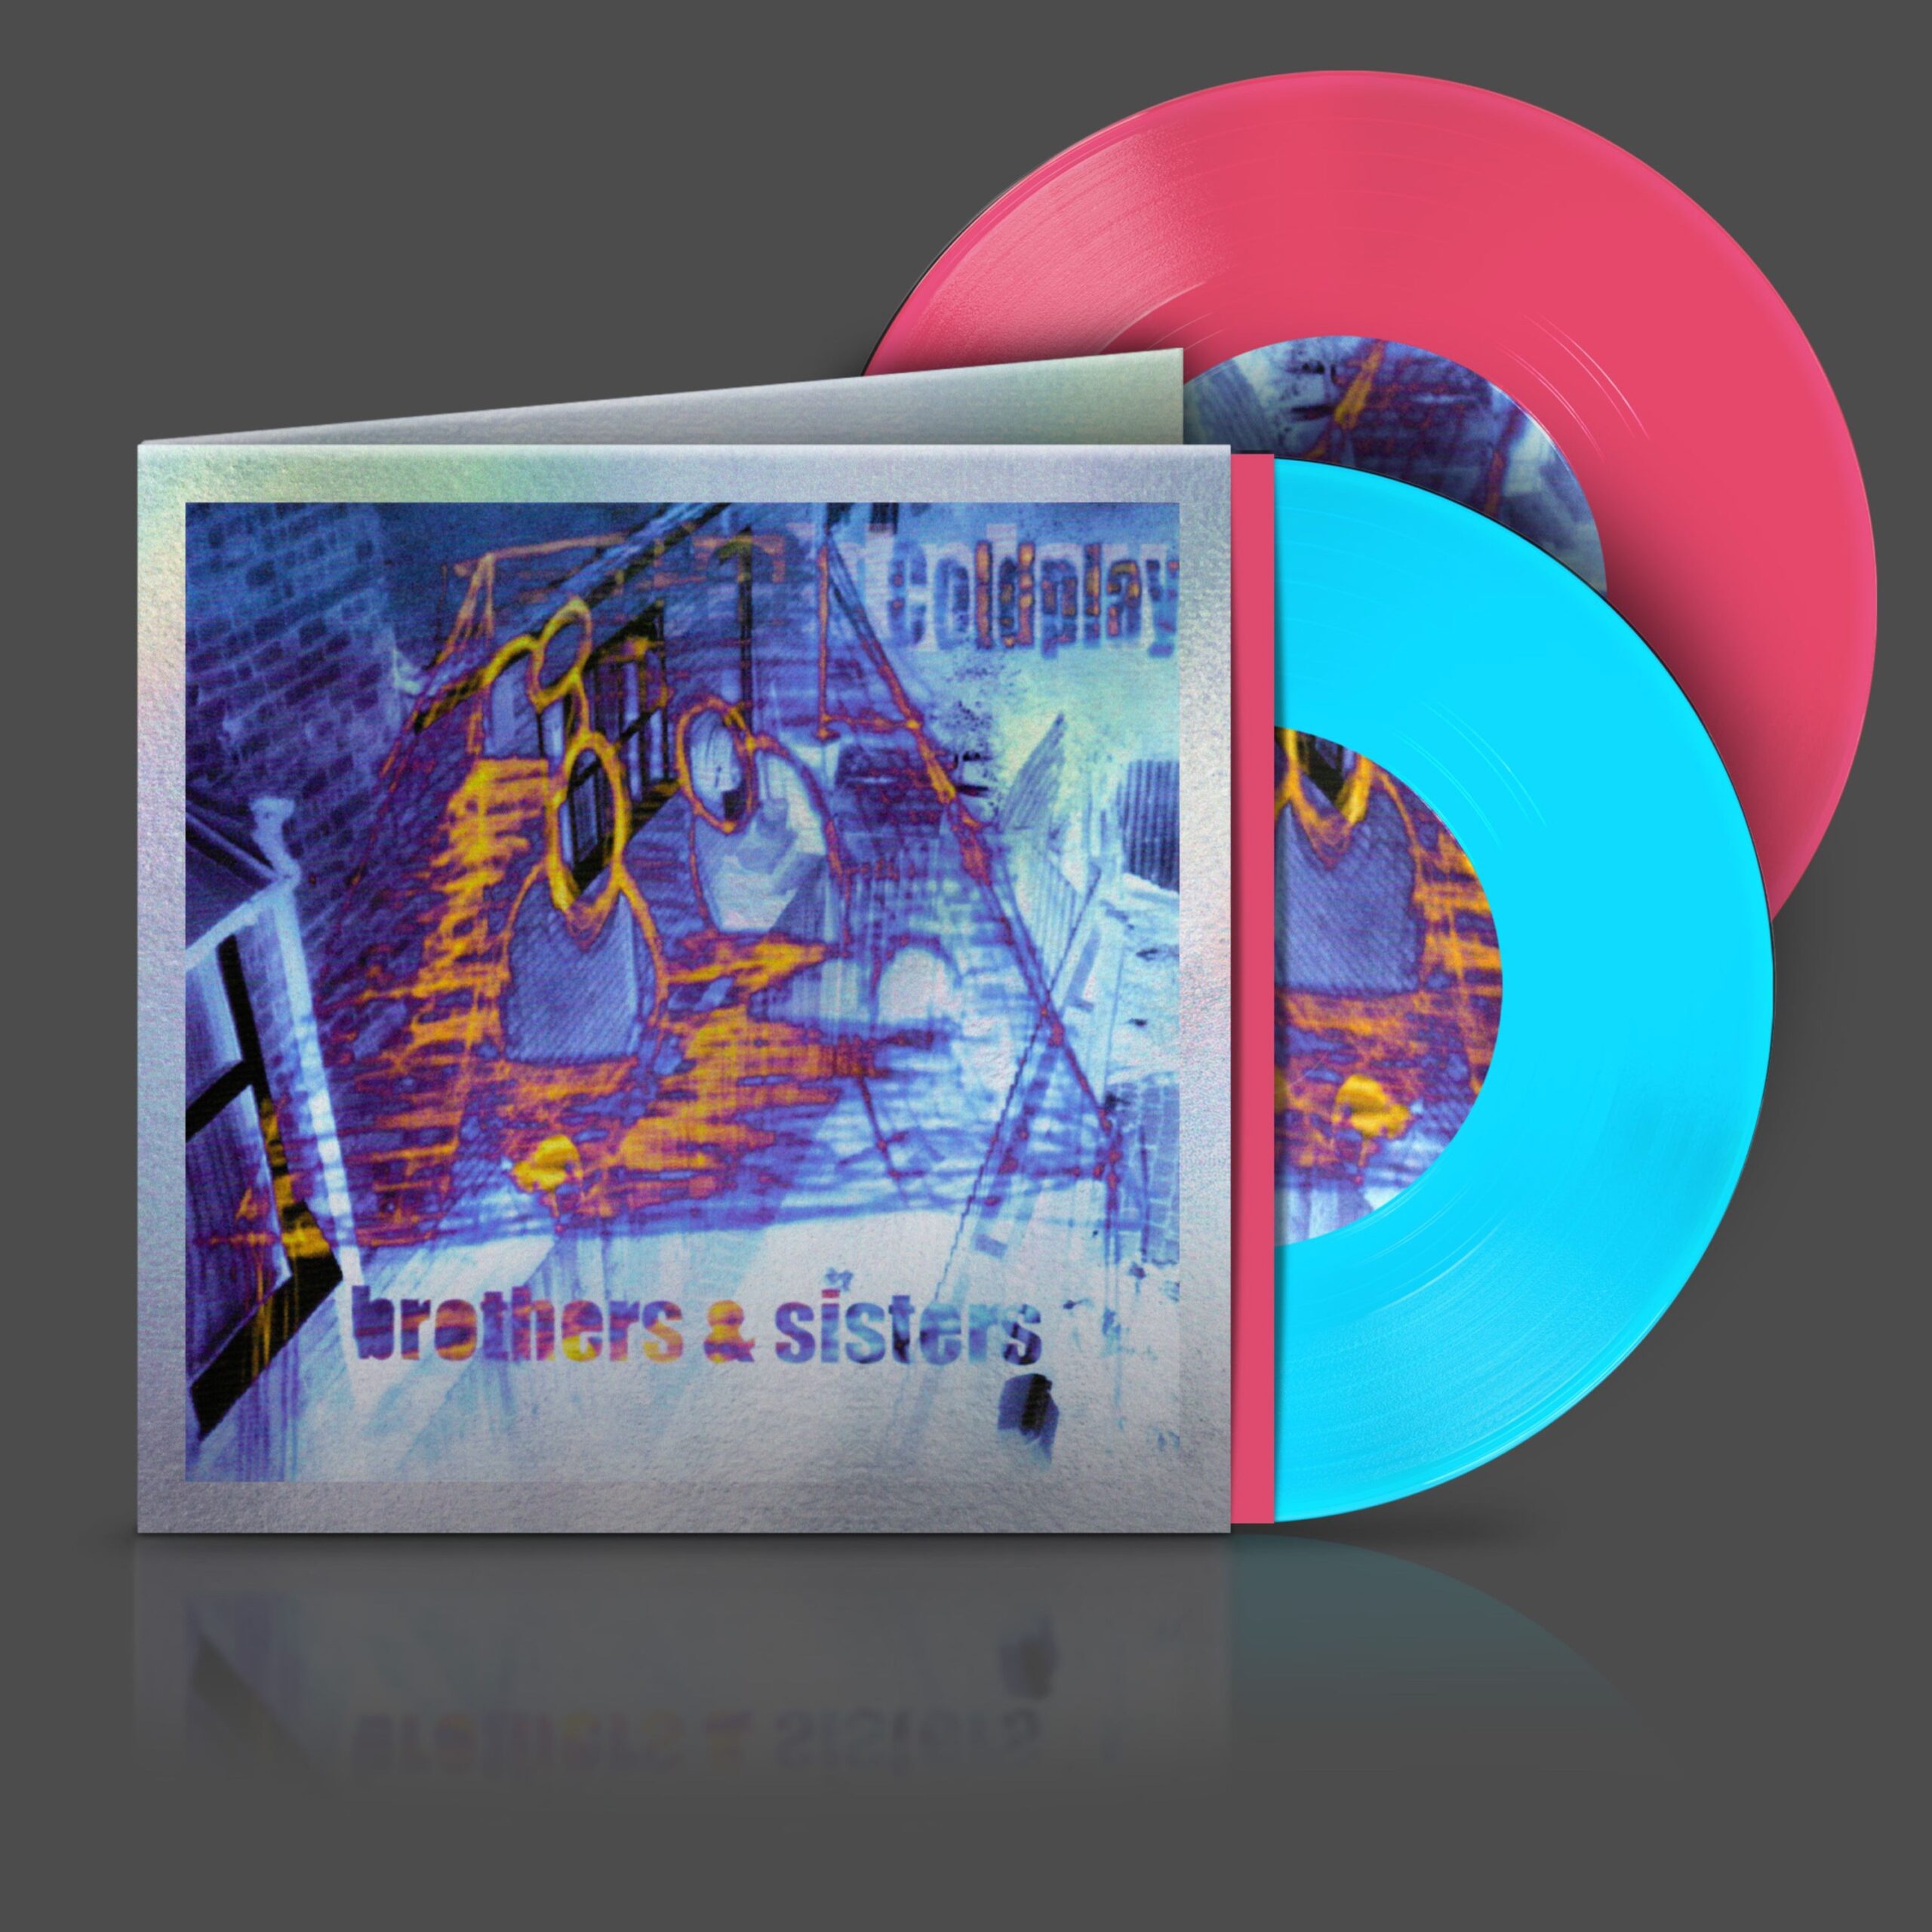 Coldplay 'Brothers & Sisters' 25th anniversary vinyl